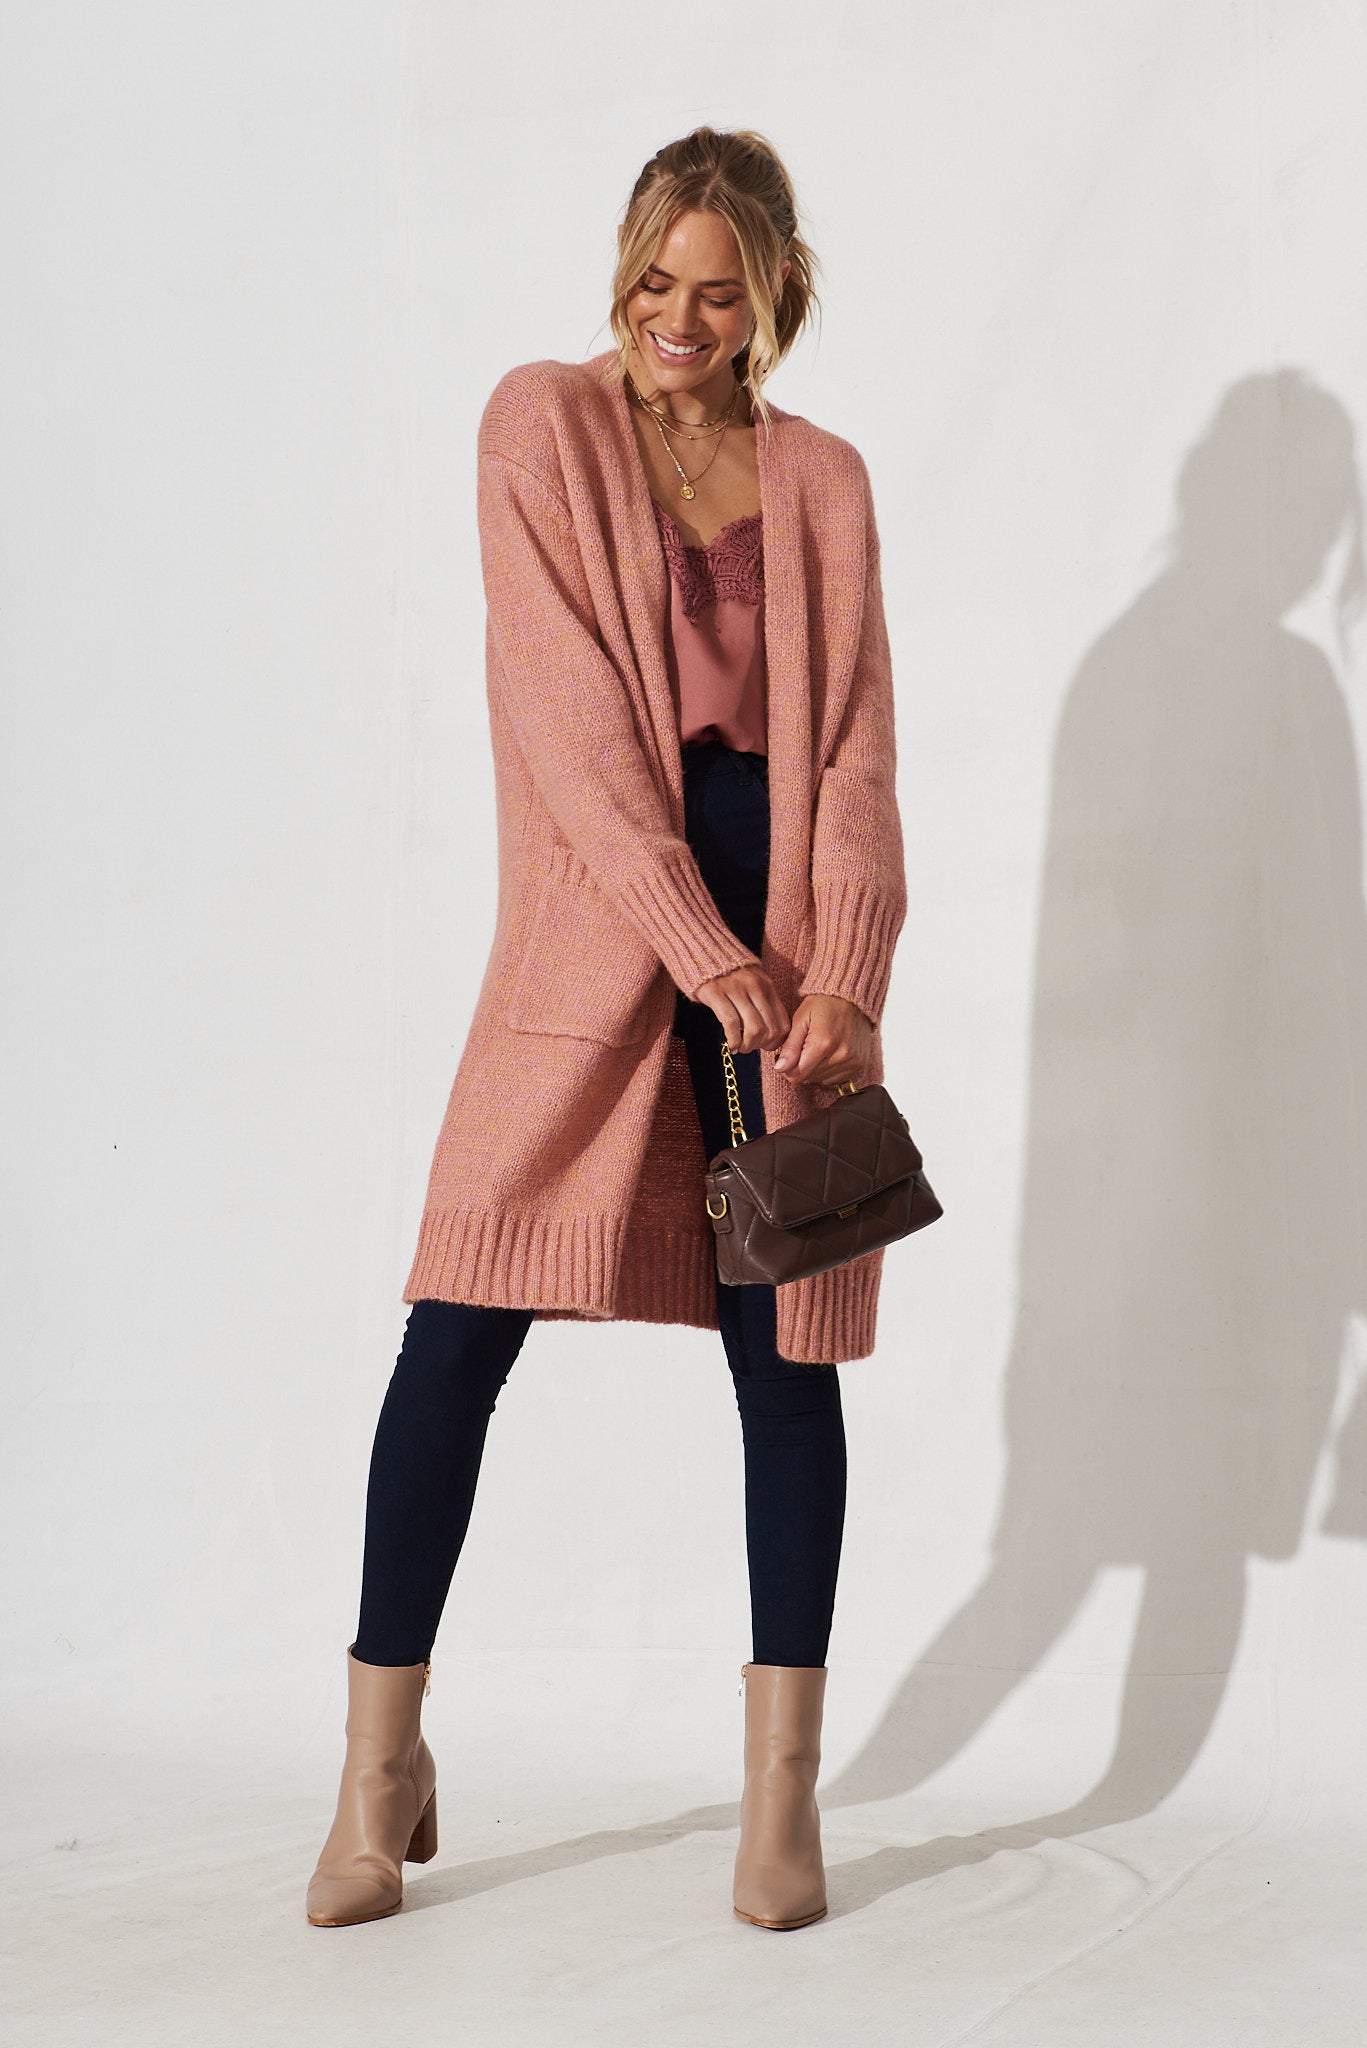 Colindale Knit Cardigan In Dusty Rose Wool Blend - full length